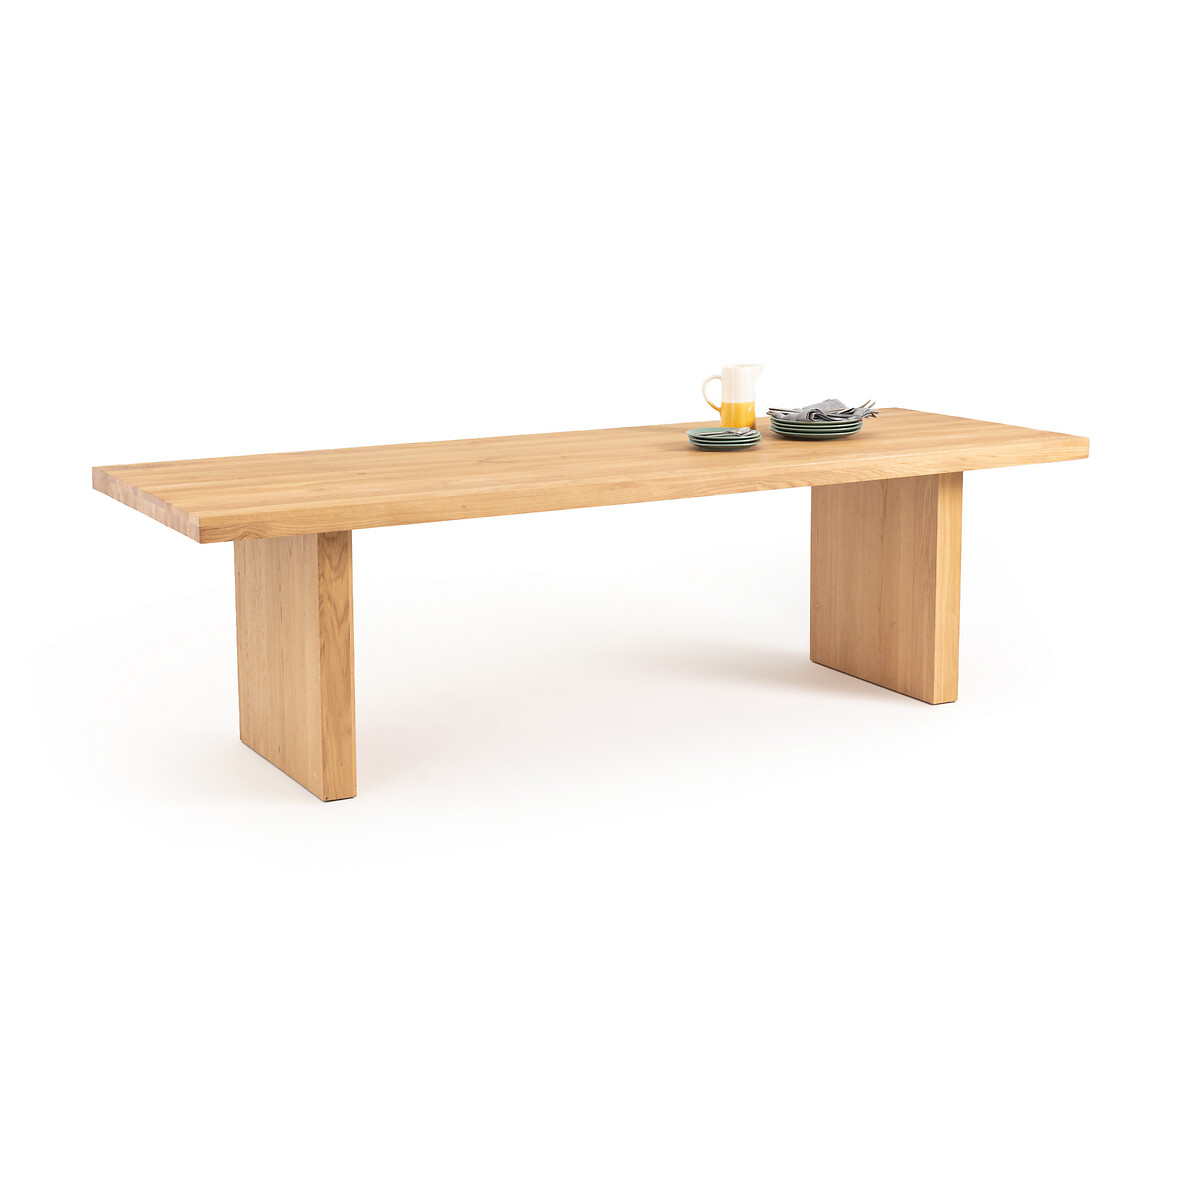 Vova Solid Oak Dining Table Seats 8 10, How Long Is Table That Seats 8